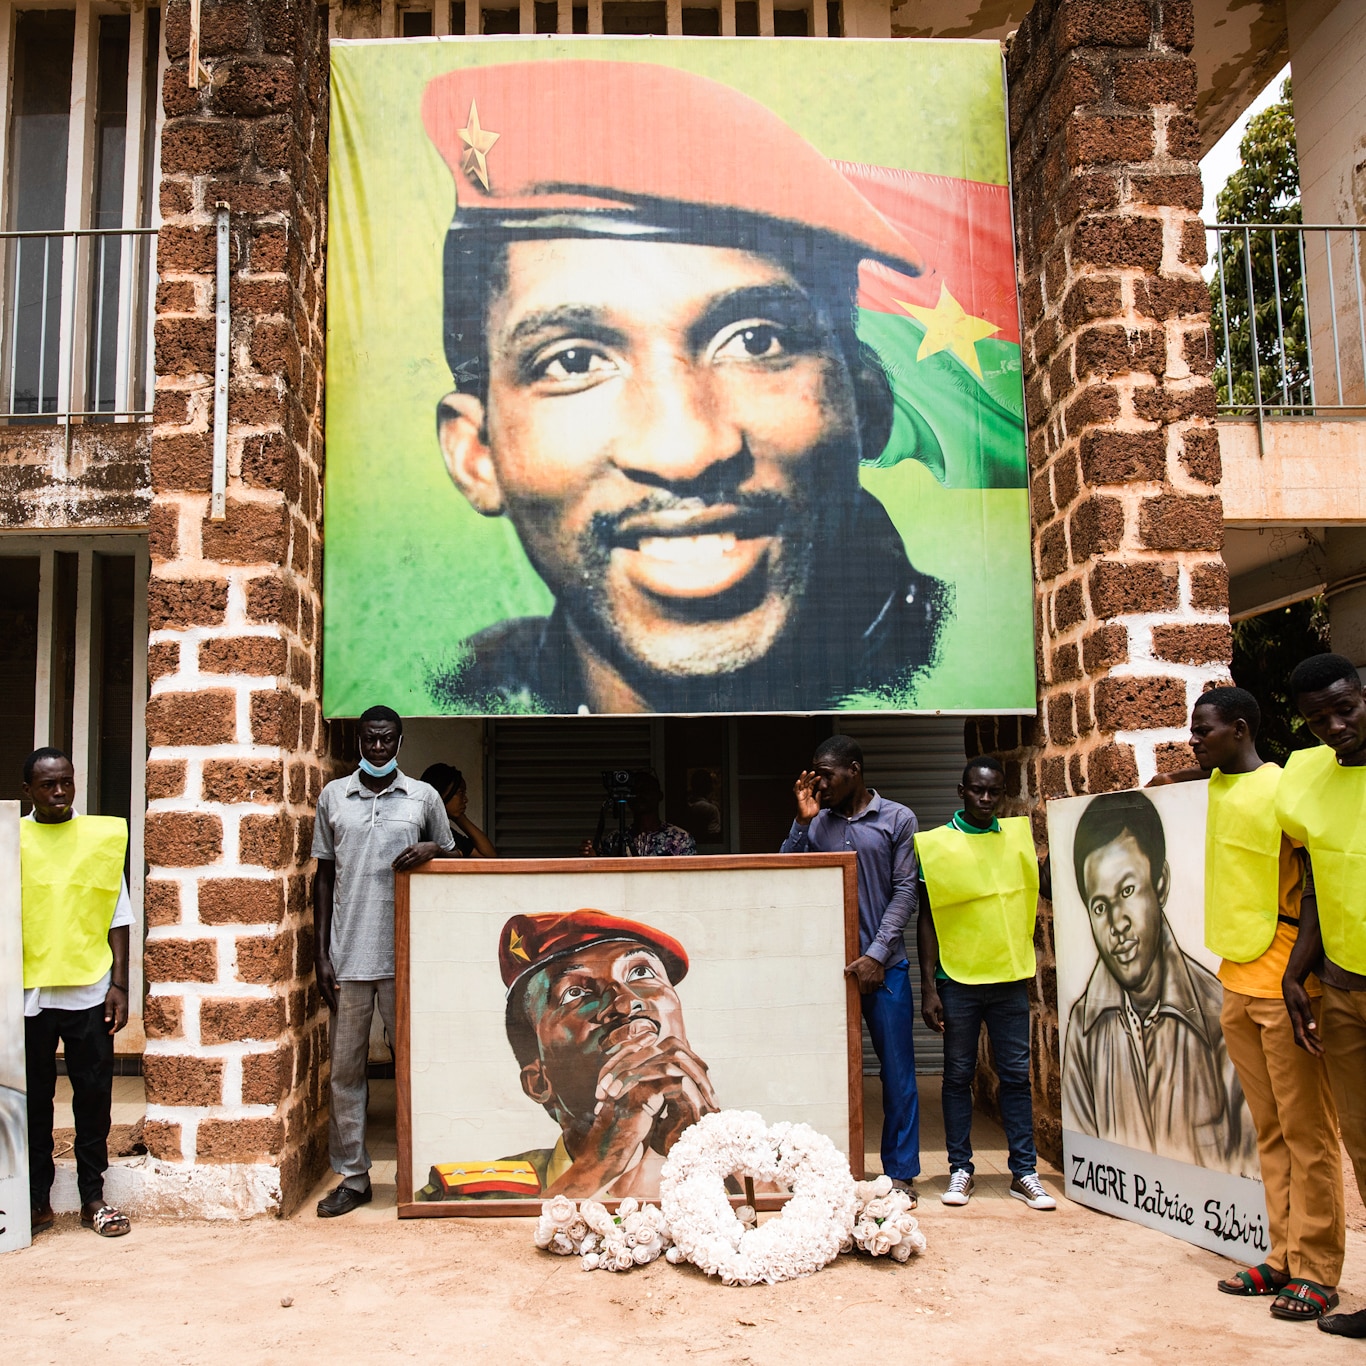 | People gather for a ceremony in front of the building where Thomas Sankara was assassinated in 1987 in Burkina Faso April 6 2022 Sophie Garcia | AP | MR Online